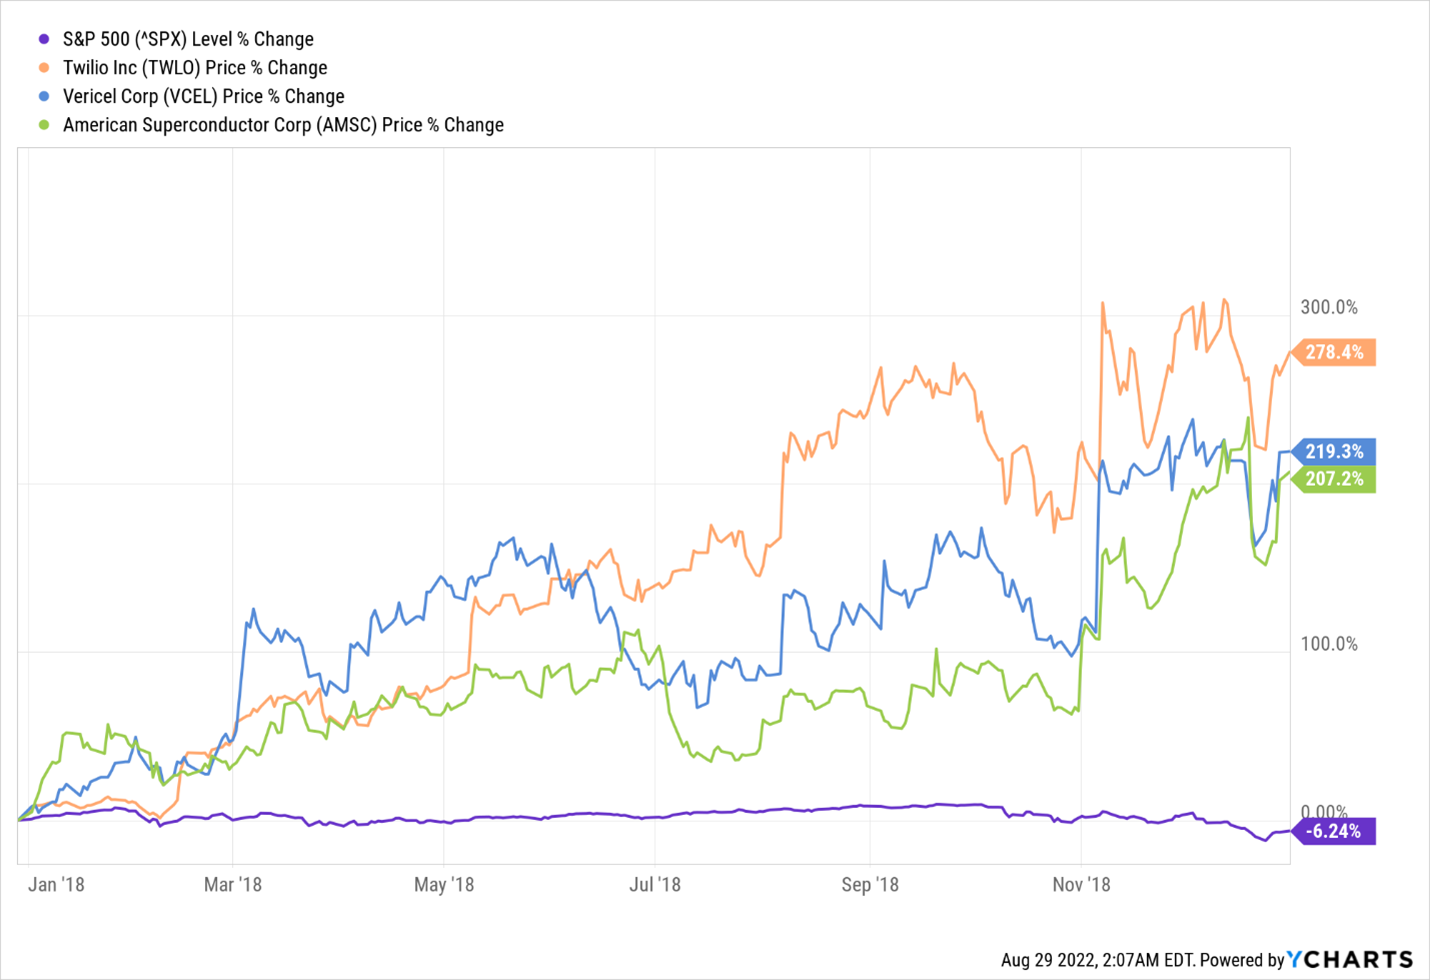 a chart that tracks the S&P 500's level % change against Twilio's price % change, Vericel's price % change, and American Superconductor's price % change from January 2018 to December 2018